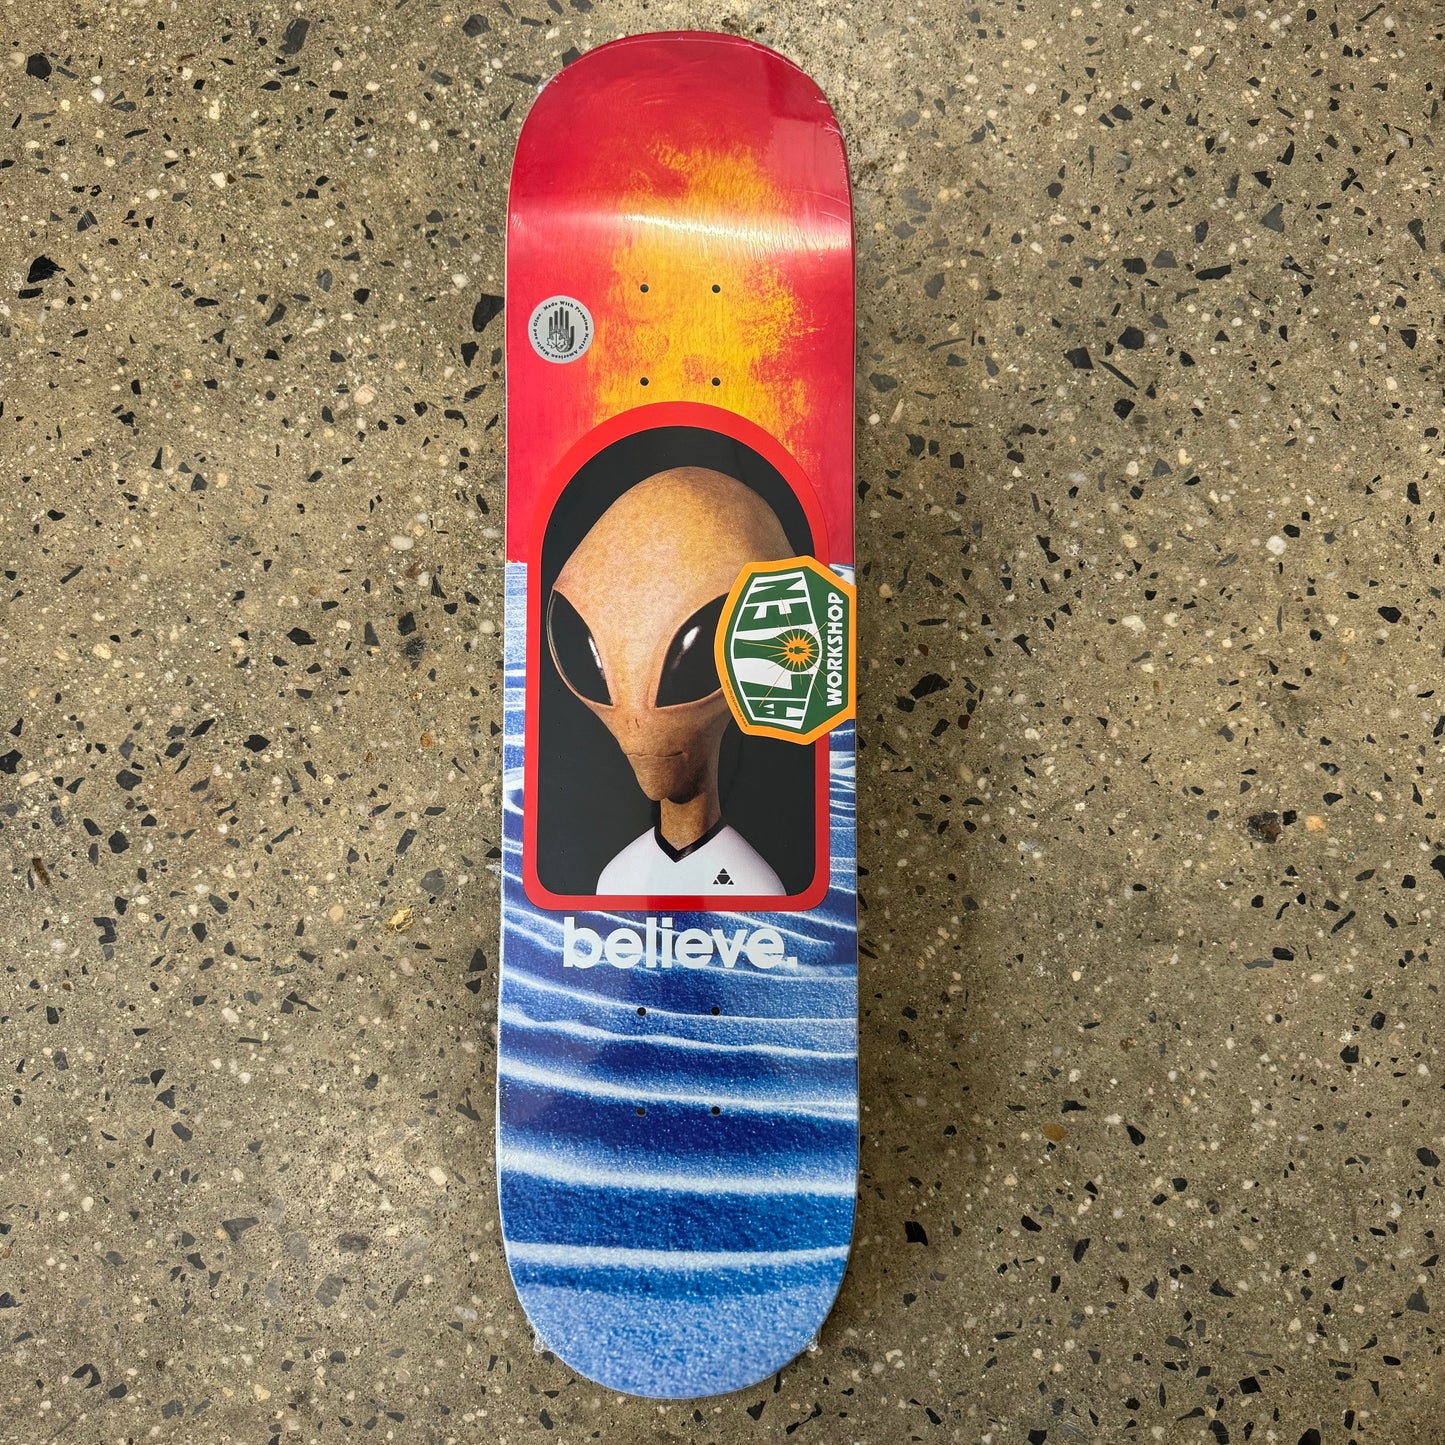 large alien head with multicolor sun and sand background, believe written underneath on skate deck